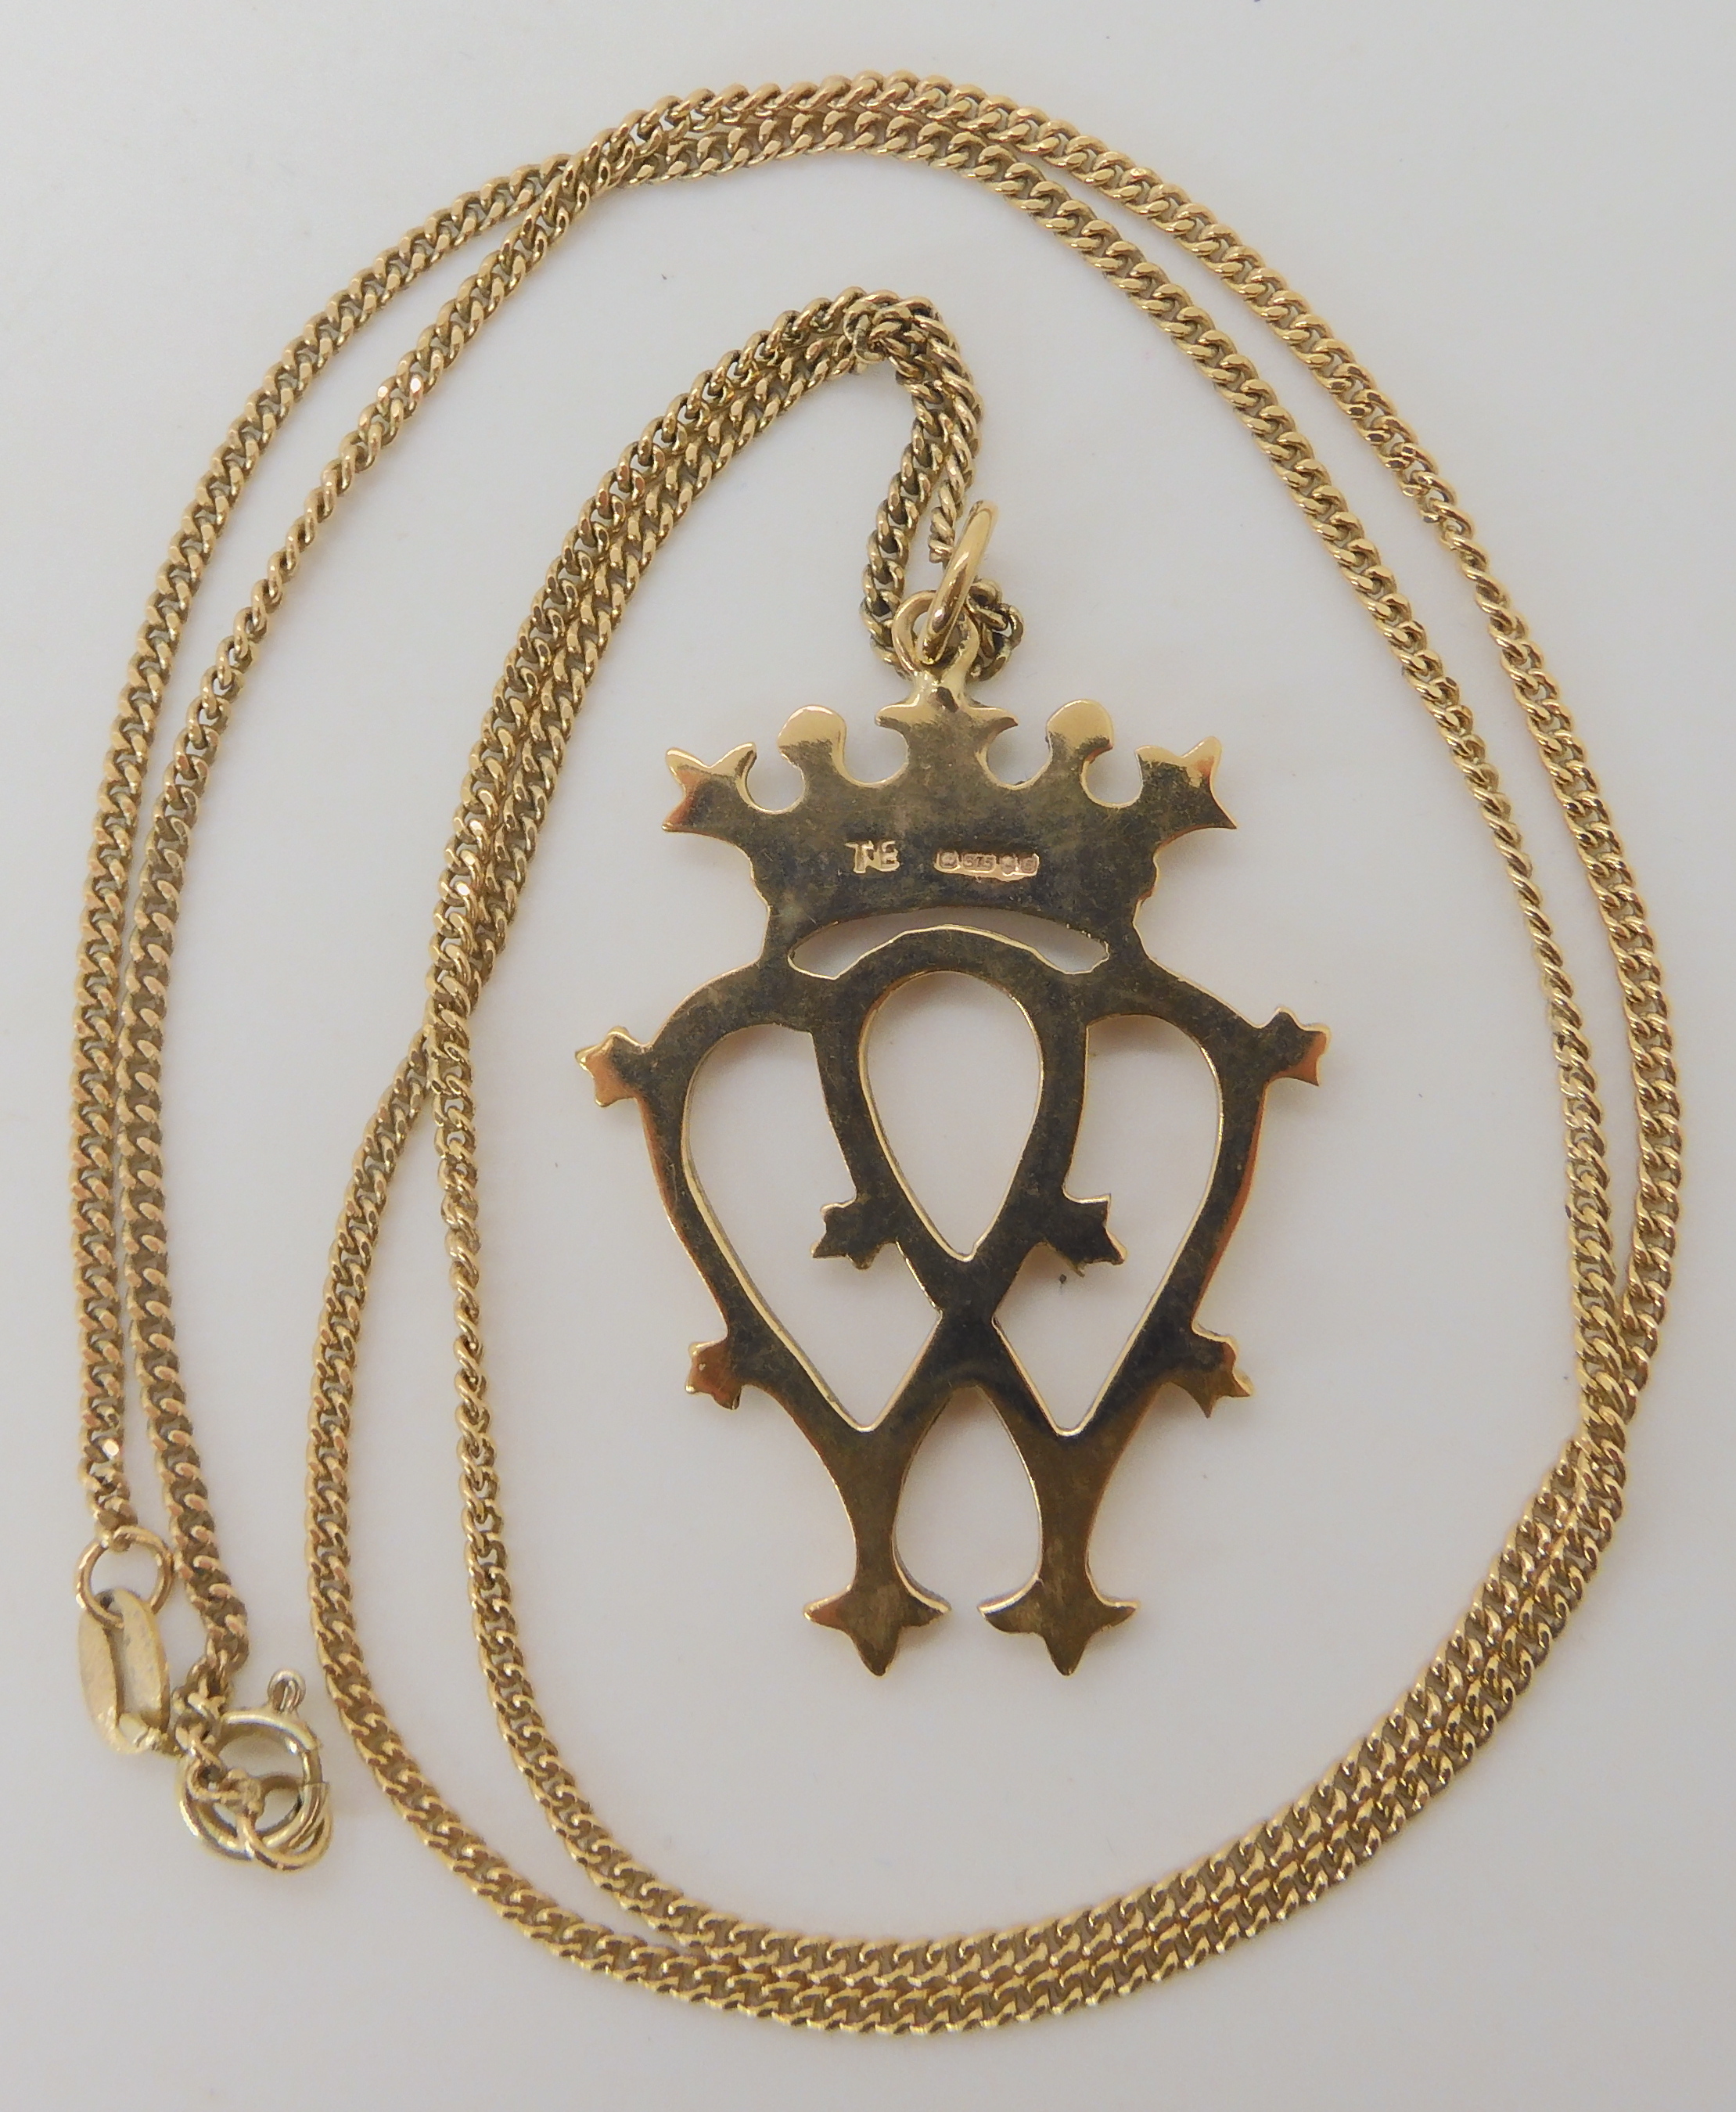 A 9ct gold luckenbooth and chain, length of pendant 4.4cm, chain 55cm, weight 11gms Condition - Image 2 of 2